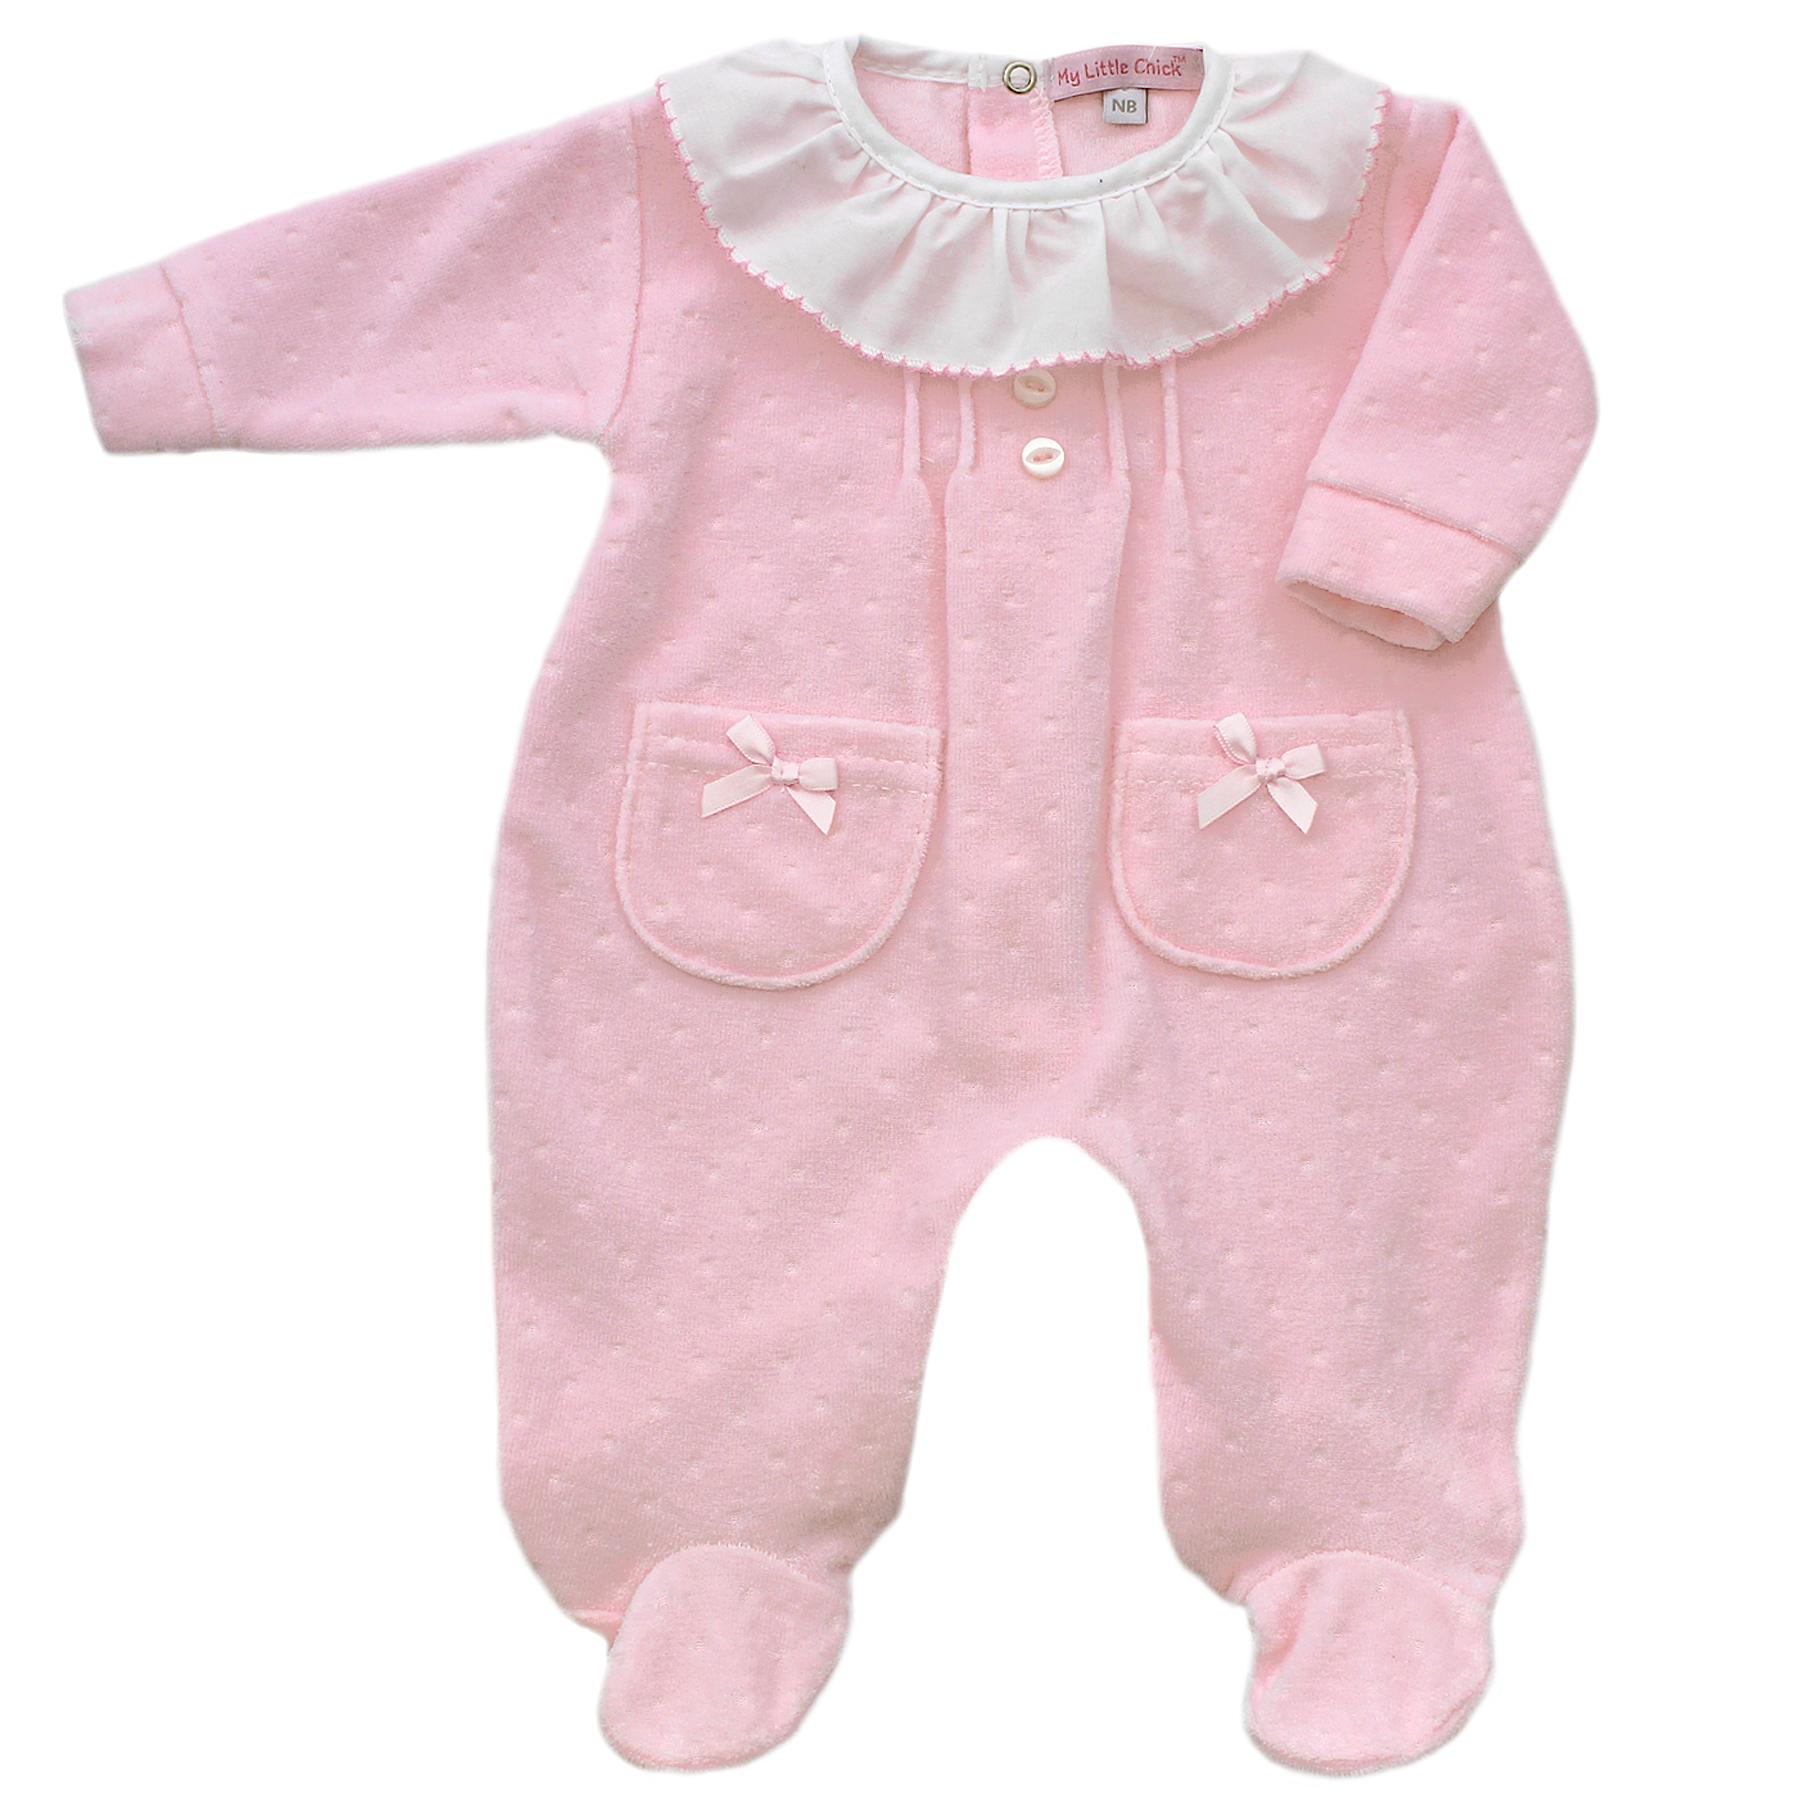 My Little Chick Pink Dimpled Velour Sleepsuit